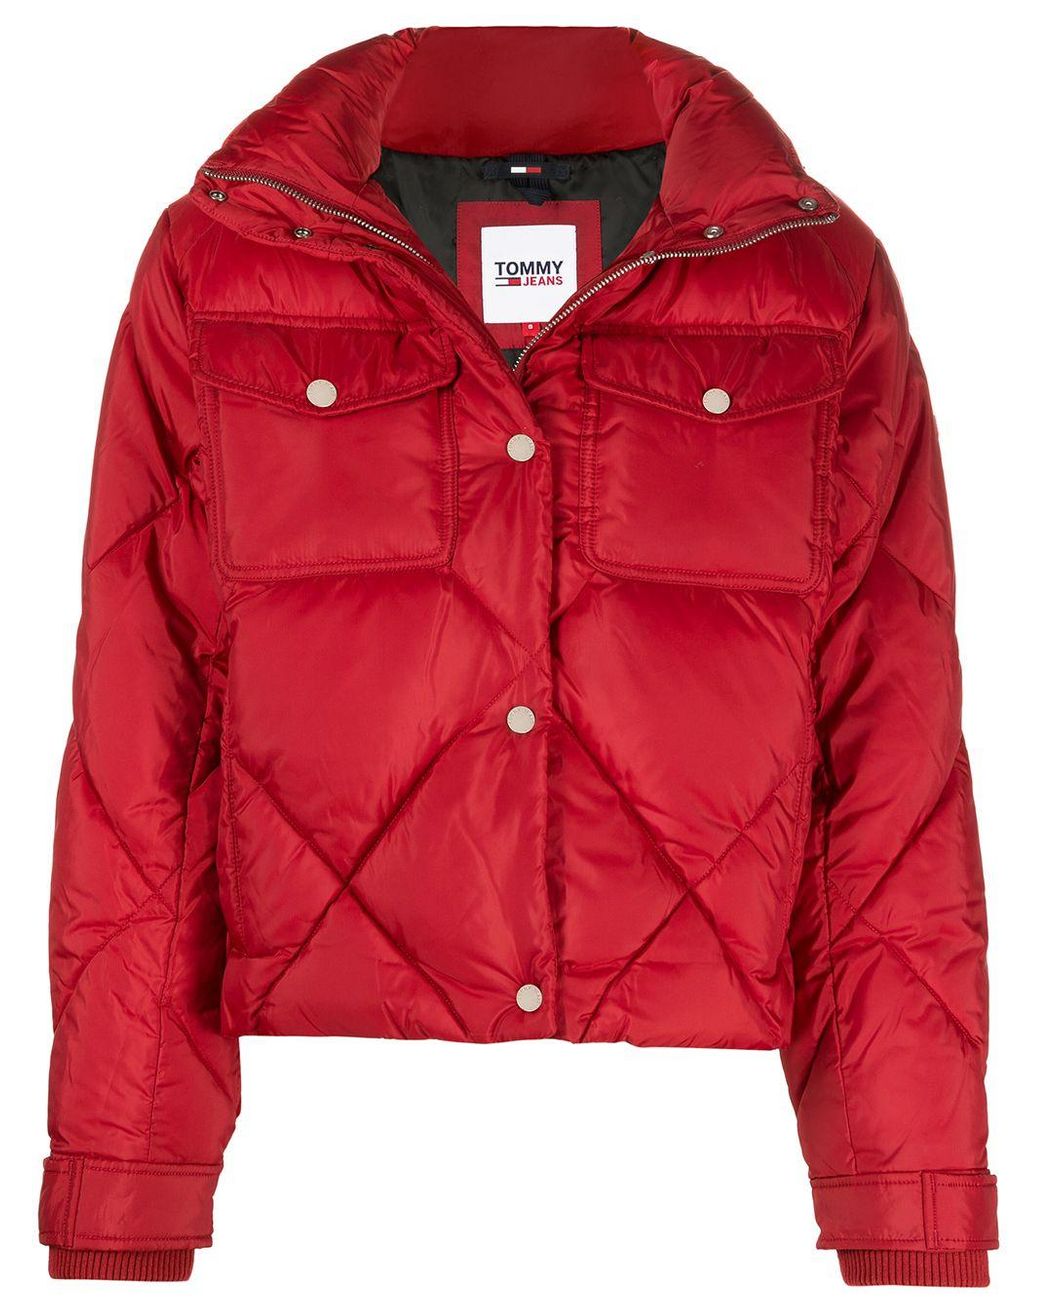 Tommy Hilfiger Diamond Quilted Jacket in Red - Lyst